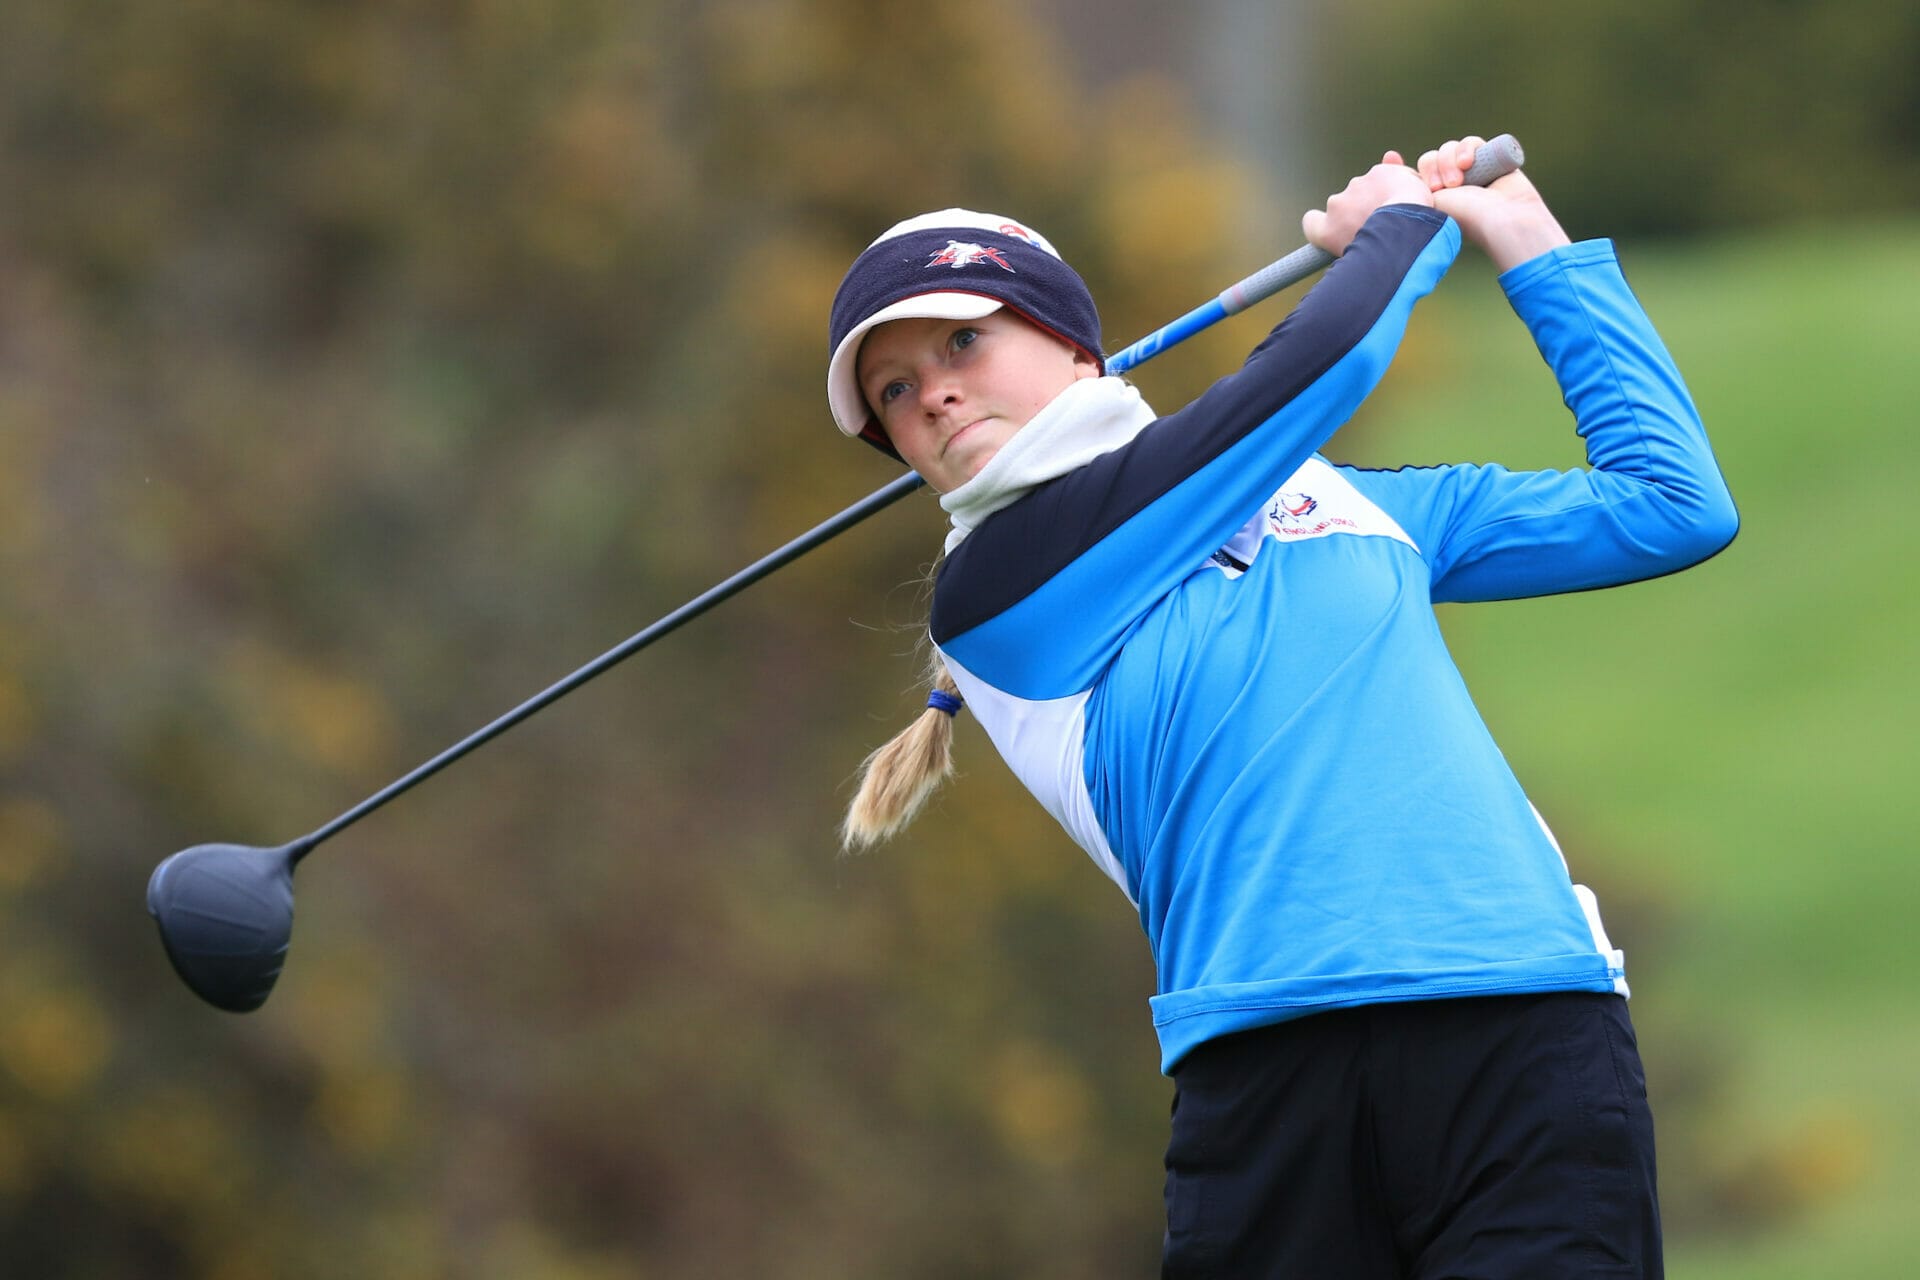 Patience Rhodes (ENG) on the 13th tee during Round 1 of the Irish Girls U18 Open Stroke Play Championship at Roganstown Golf & Country Club, Dublin, Ireland. 05/04/19 Picture: Thos Caffrey / www.golffile.ie